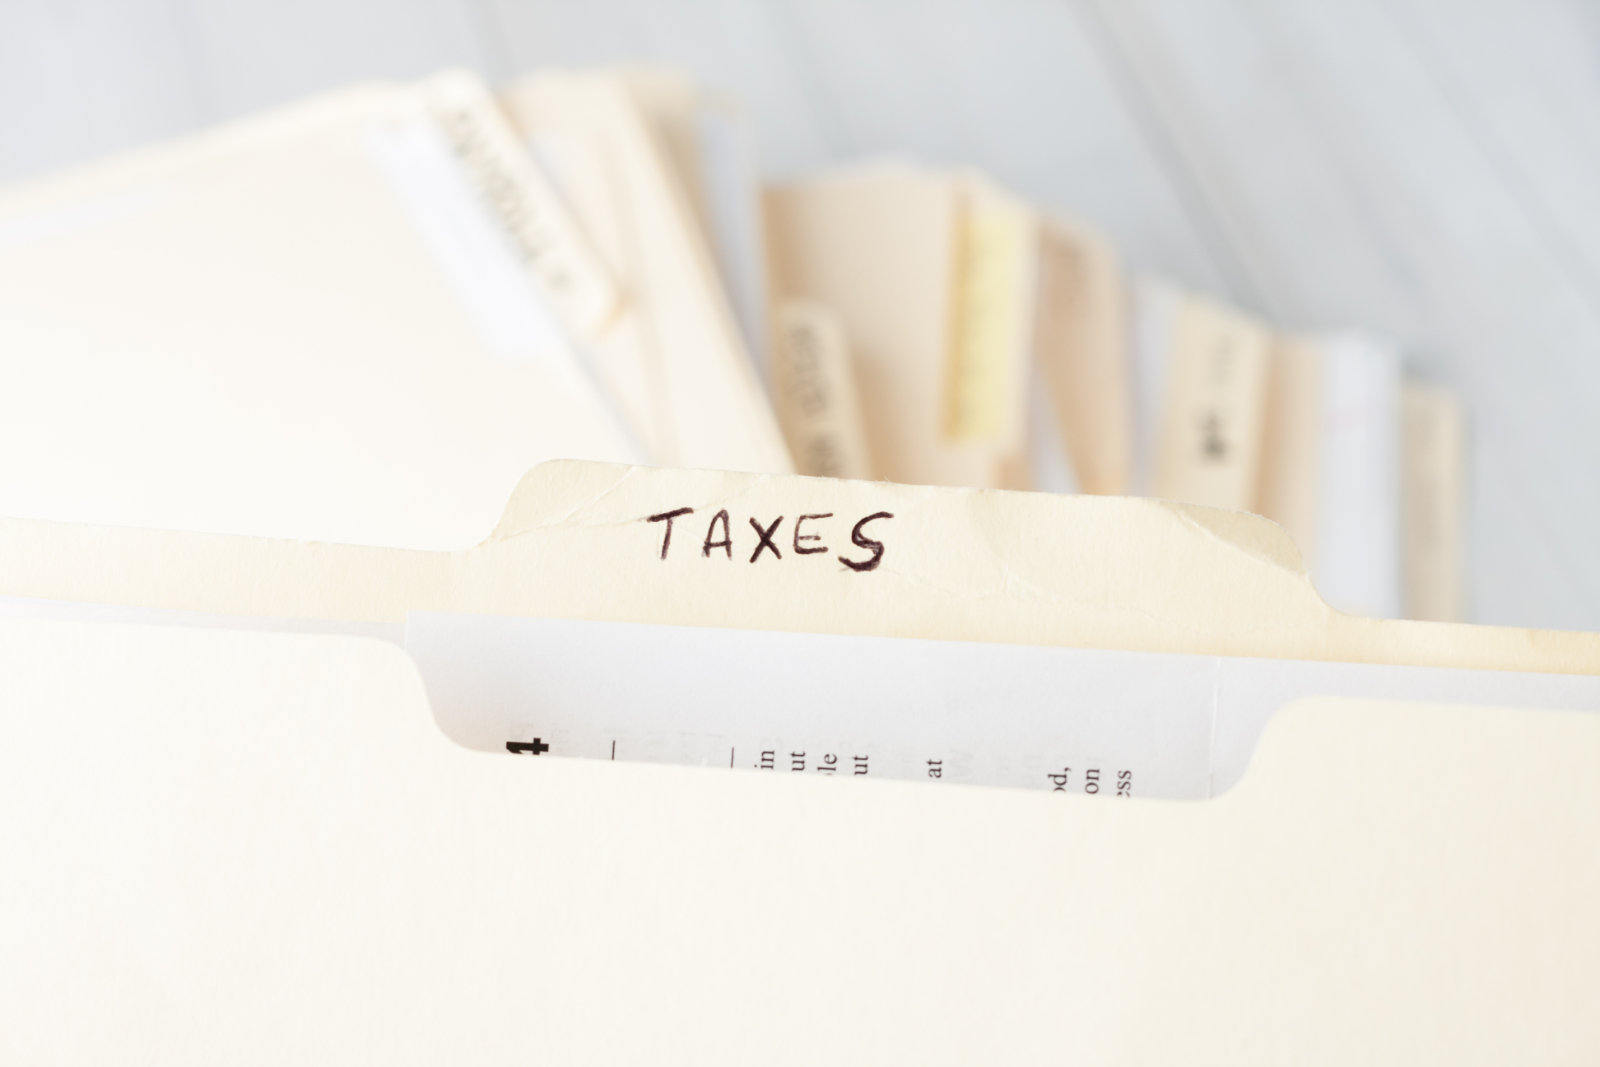 Reduce Personal Federal Taxes Using These Methods